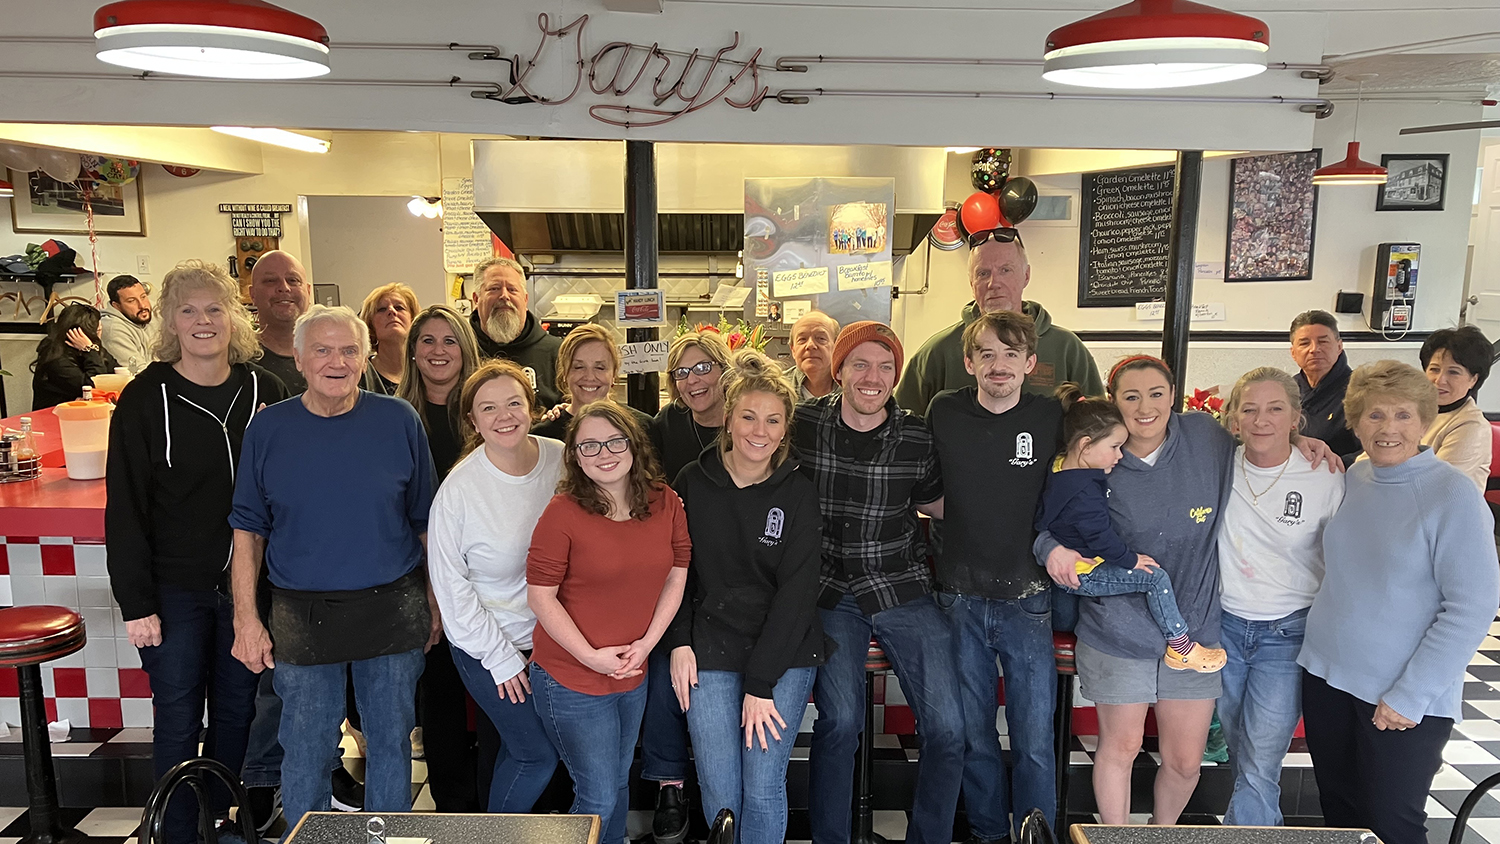 Gary Hooks, second from left, and his wife, Mary, far right, pose for a group portrait with family and friends after their diner, Gary's Handy Lunch closed its doors for the last time on Feb. 12, 2023. Gary's Handy lunch was a beloved diner in downtown Newport.